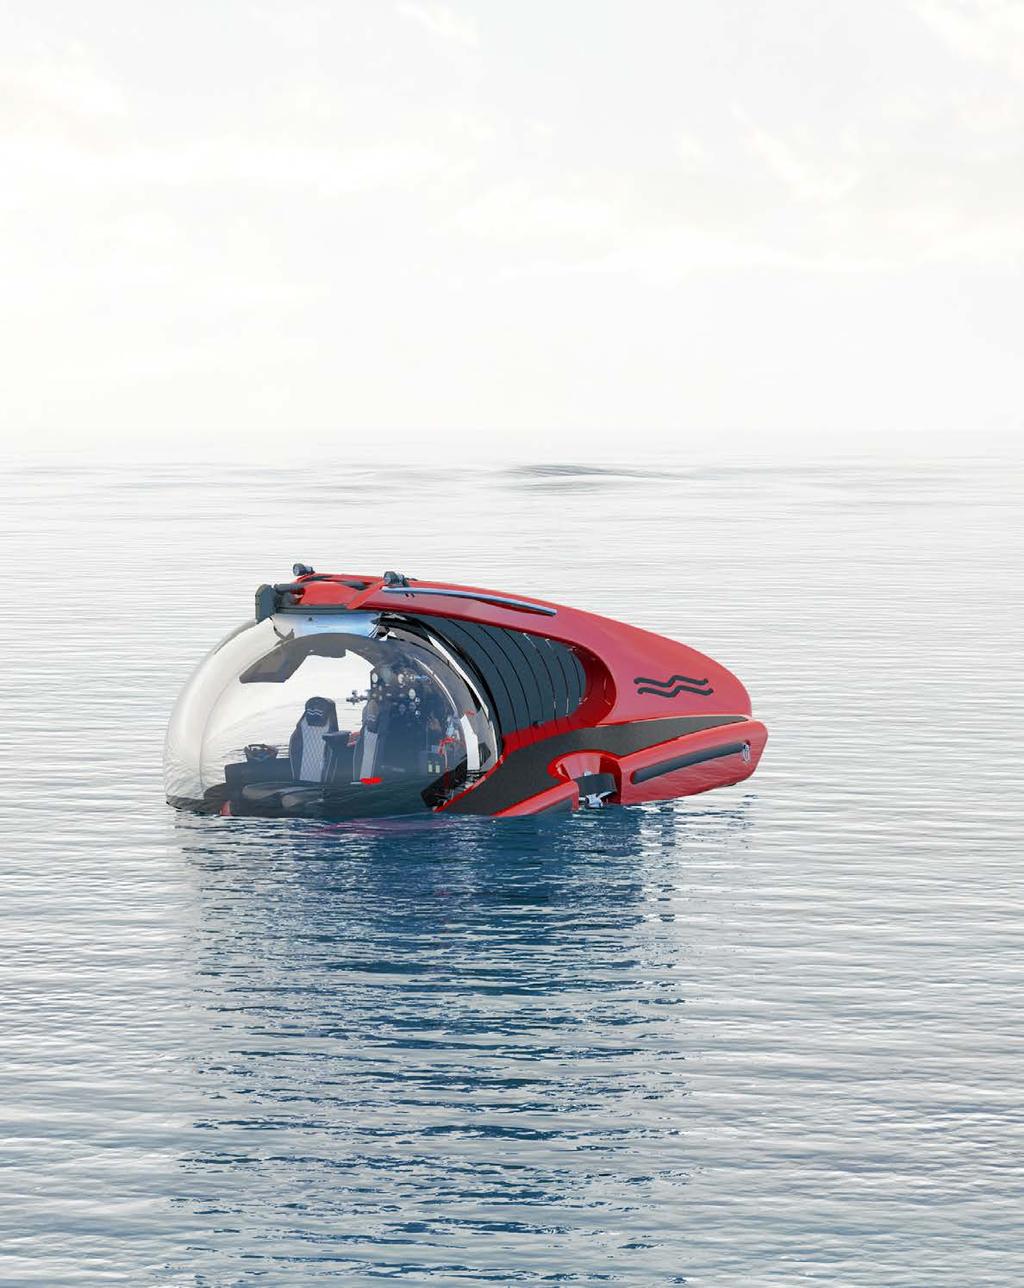 UNCOMPROMISED SURFACE CAPABILITIES The C-Researcher is designed with boat-like handling characteristics, allowing to manoeuvre freely at the surface and even move laterally.